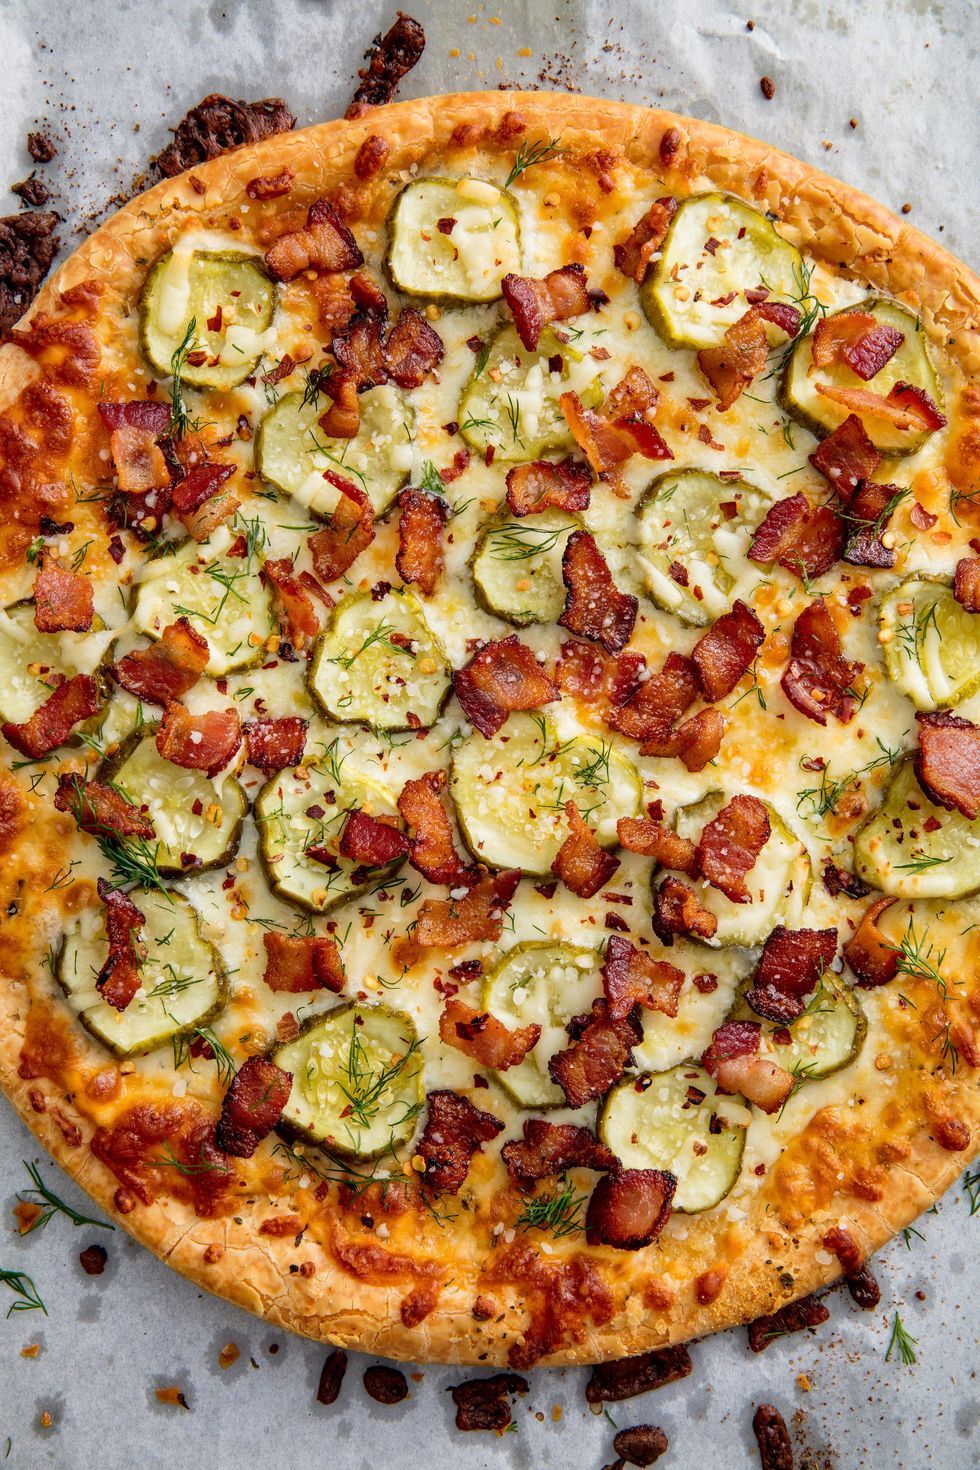 10 Homemade Pizza Recipes To Have Your Own Pizza Night At Home